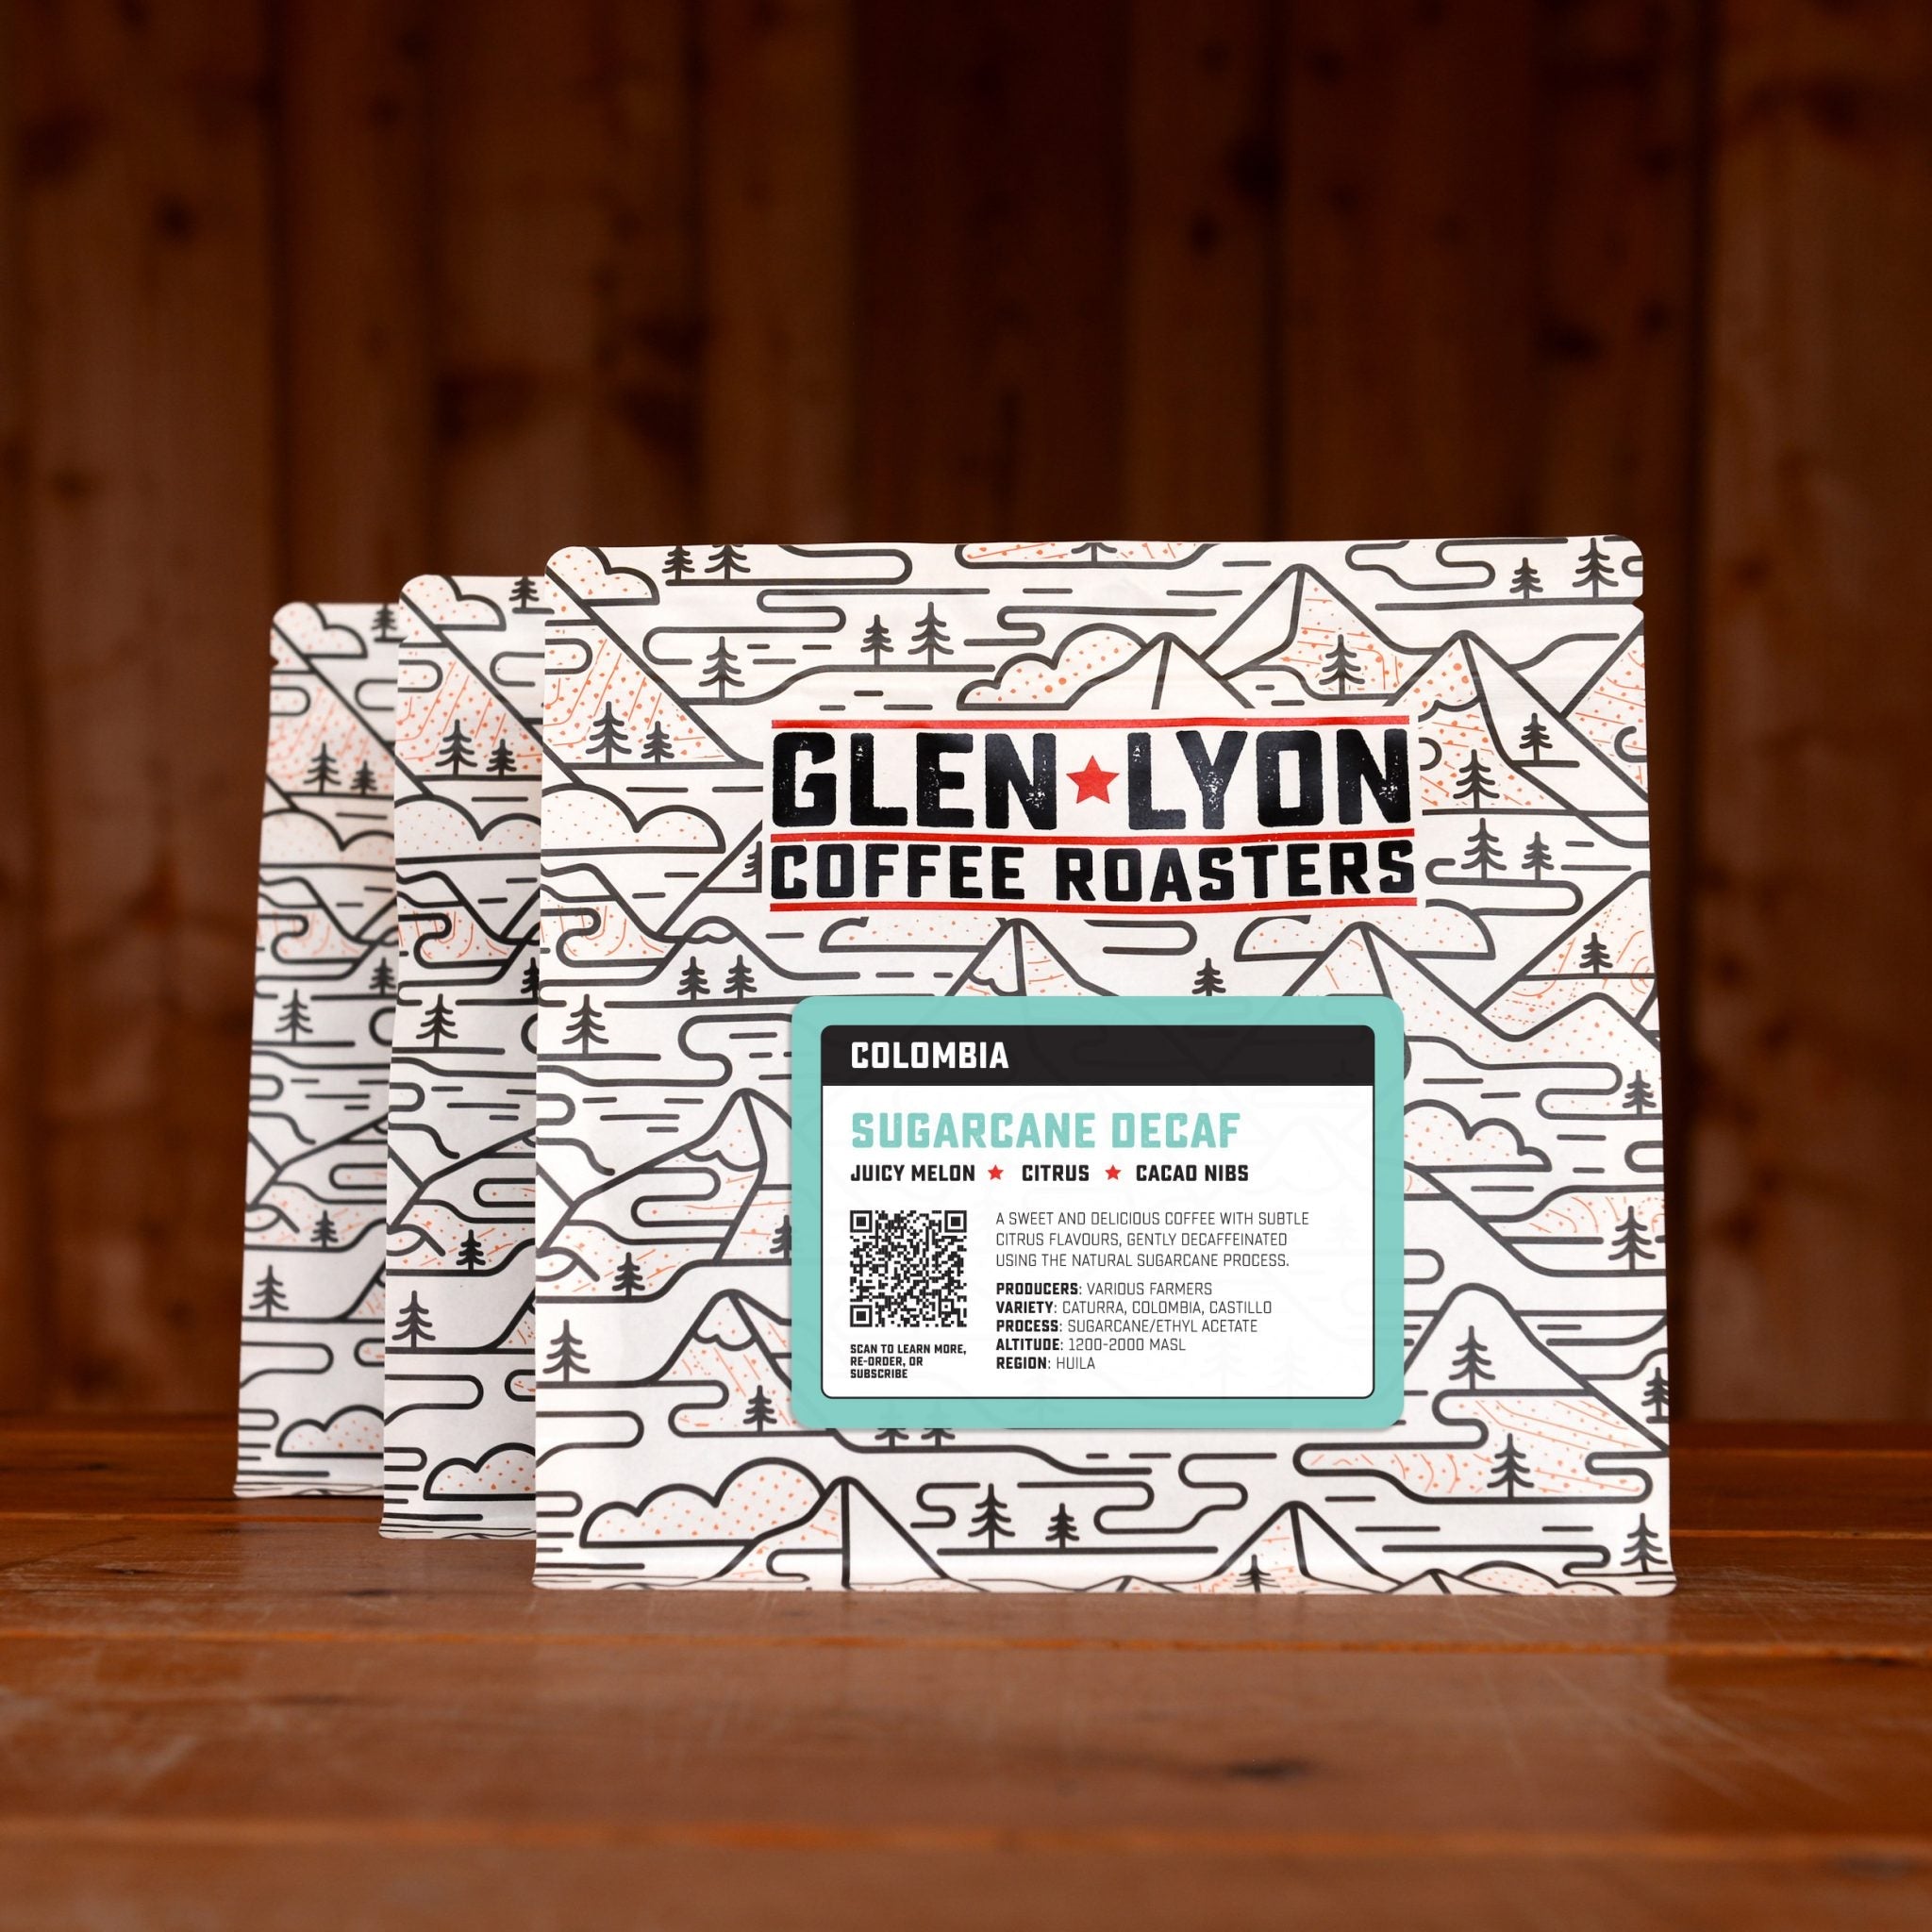 Three bags of Glen Lyon Coffee Roasters Decaf speciality coffee subscription